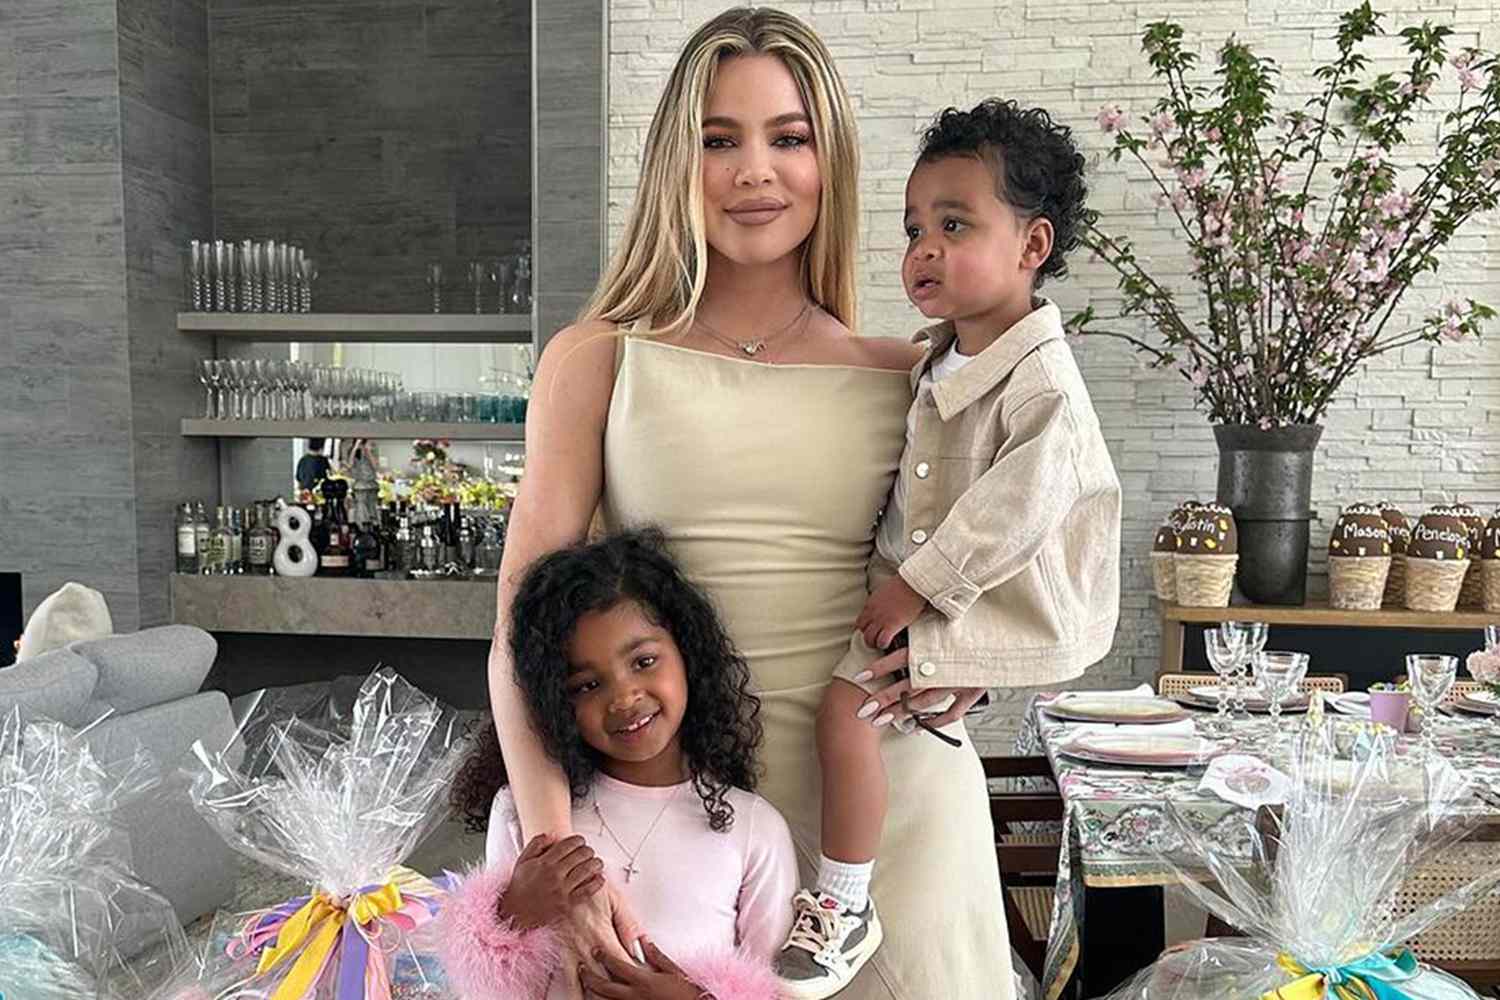 Khloé Kardashian Defends Spending Her Time at Home with Her Kids: ‘This Is What Makes Me Happy’